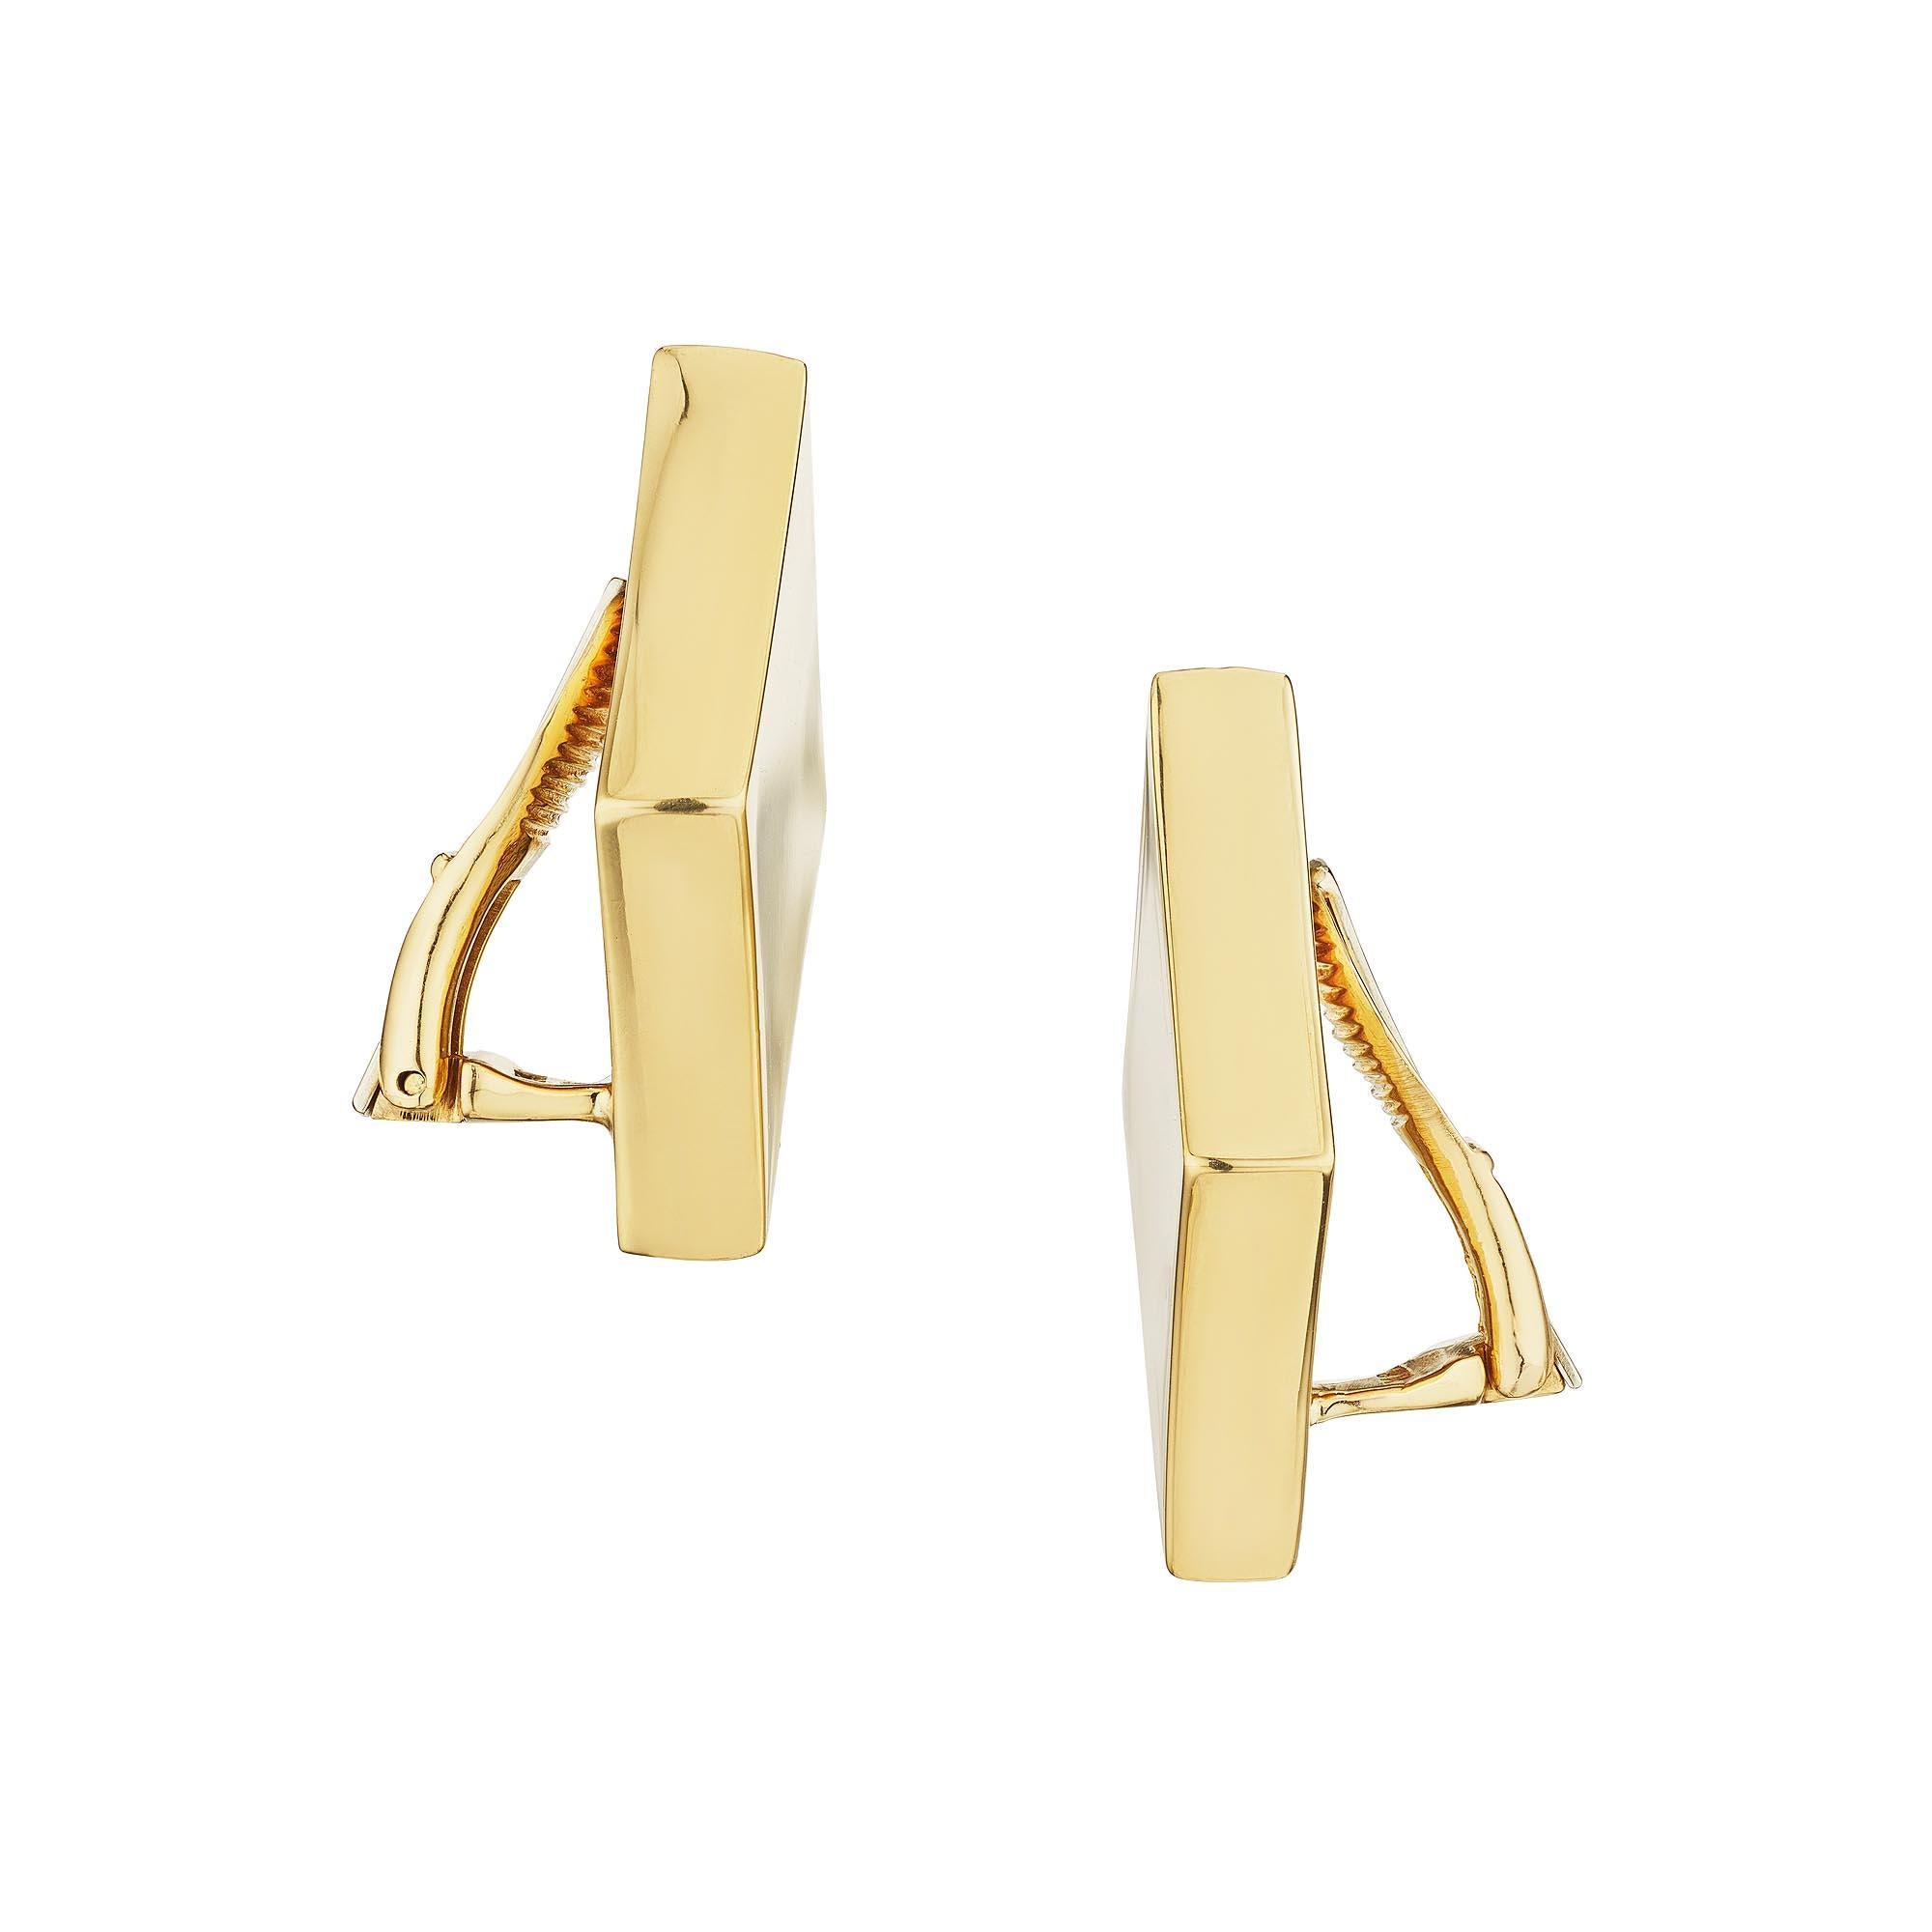 The diamond symbol is one of the four French suits of playing cards which symbolize wealth and financial success, and these Aldo Cipullo for Cartier modernist 18 karat yellow gold parallelogram clip earrings are a rare treasure.  Signed Cartier A.